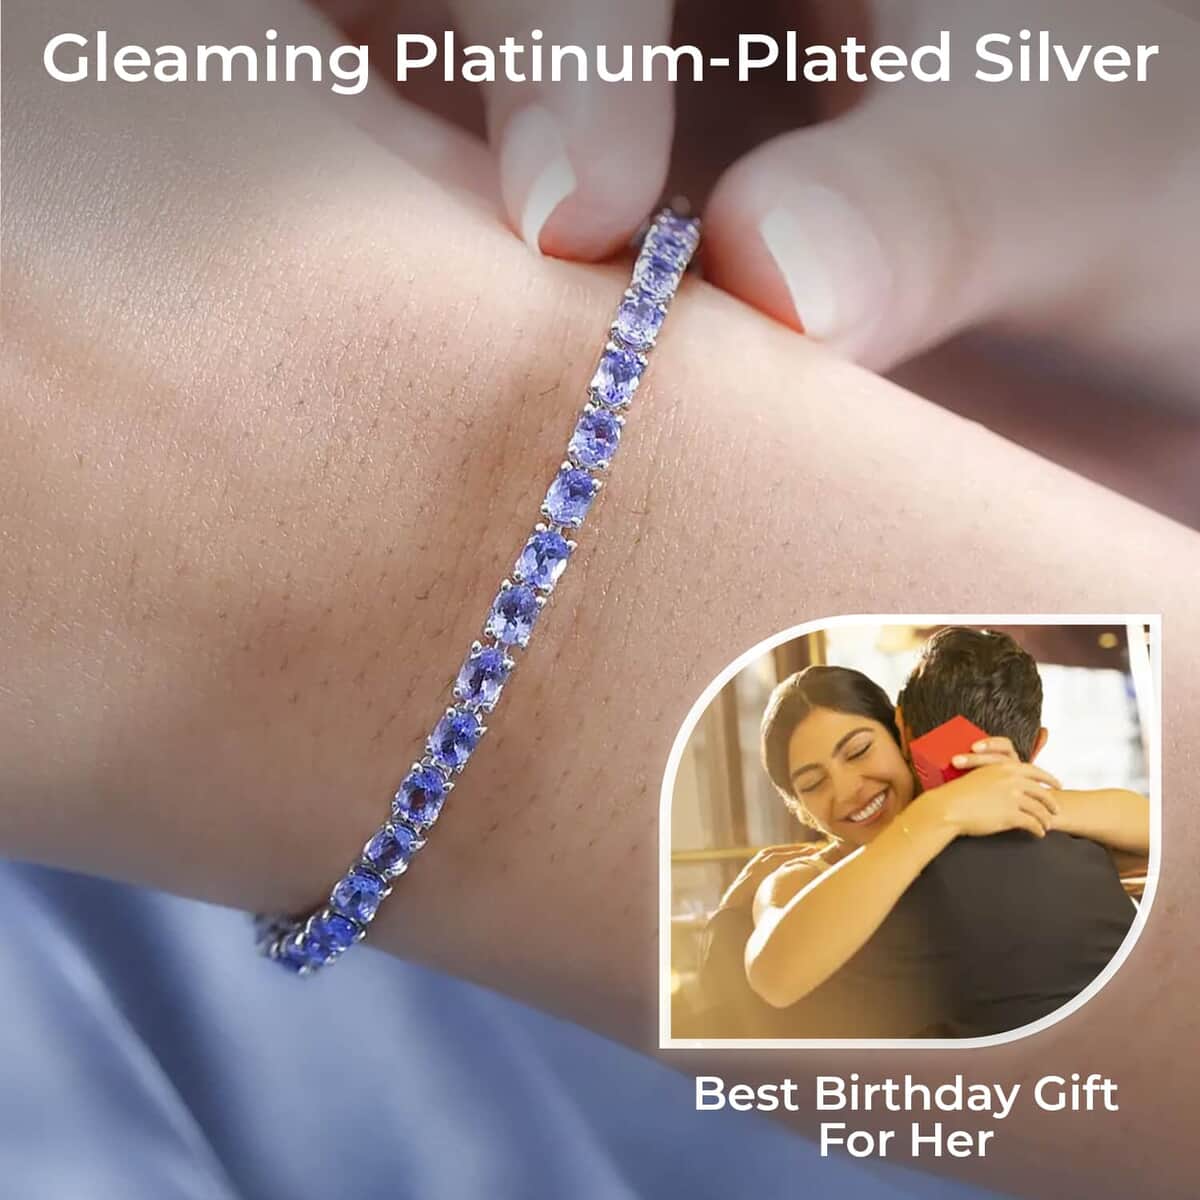 Tanzanite 7.20 ctw Tennis Bracelet, Platinum Over Sterling Silver Bracelet, Tanzanite Jewelry, Gifts For Her (6.50 In) image number 2